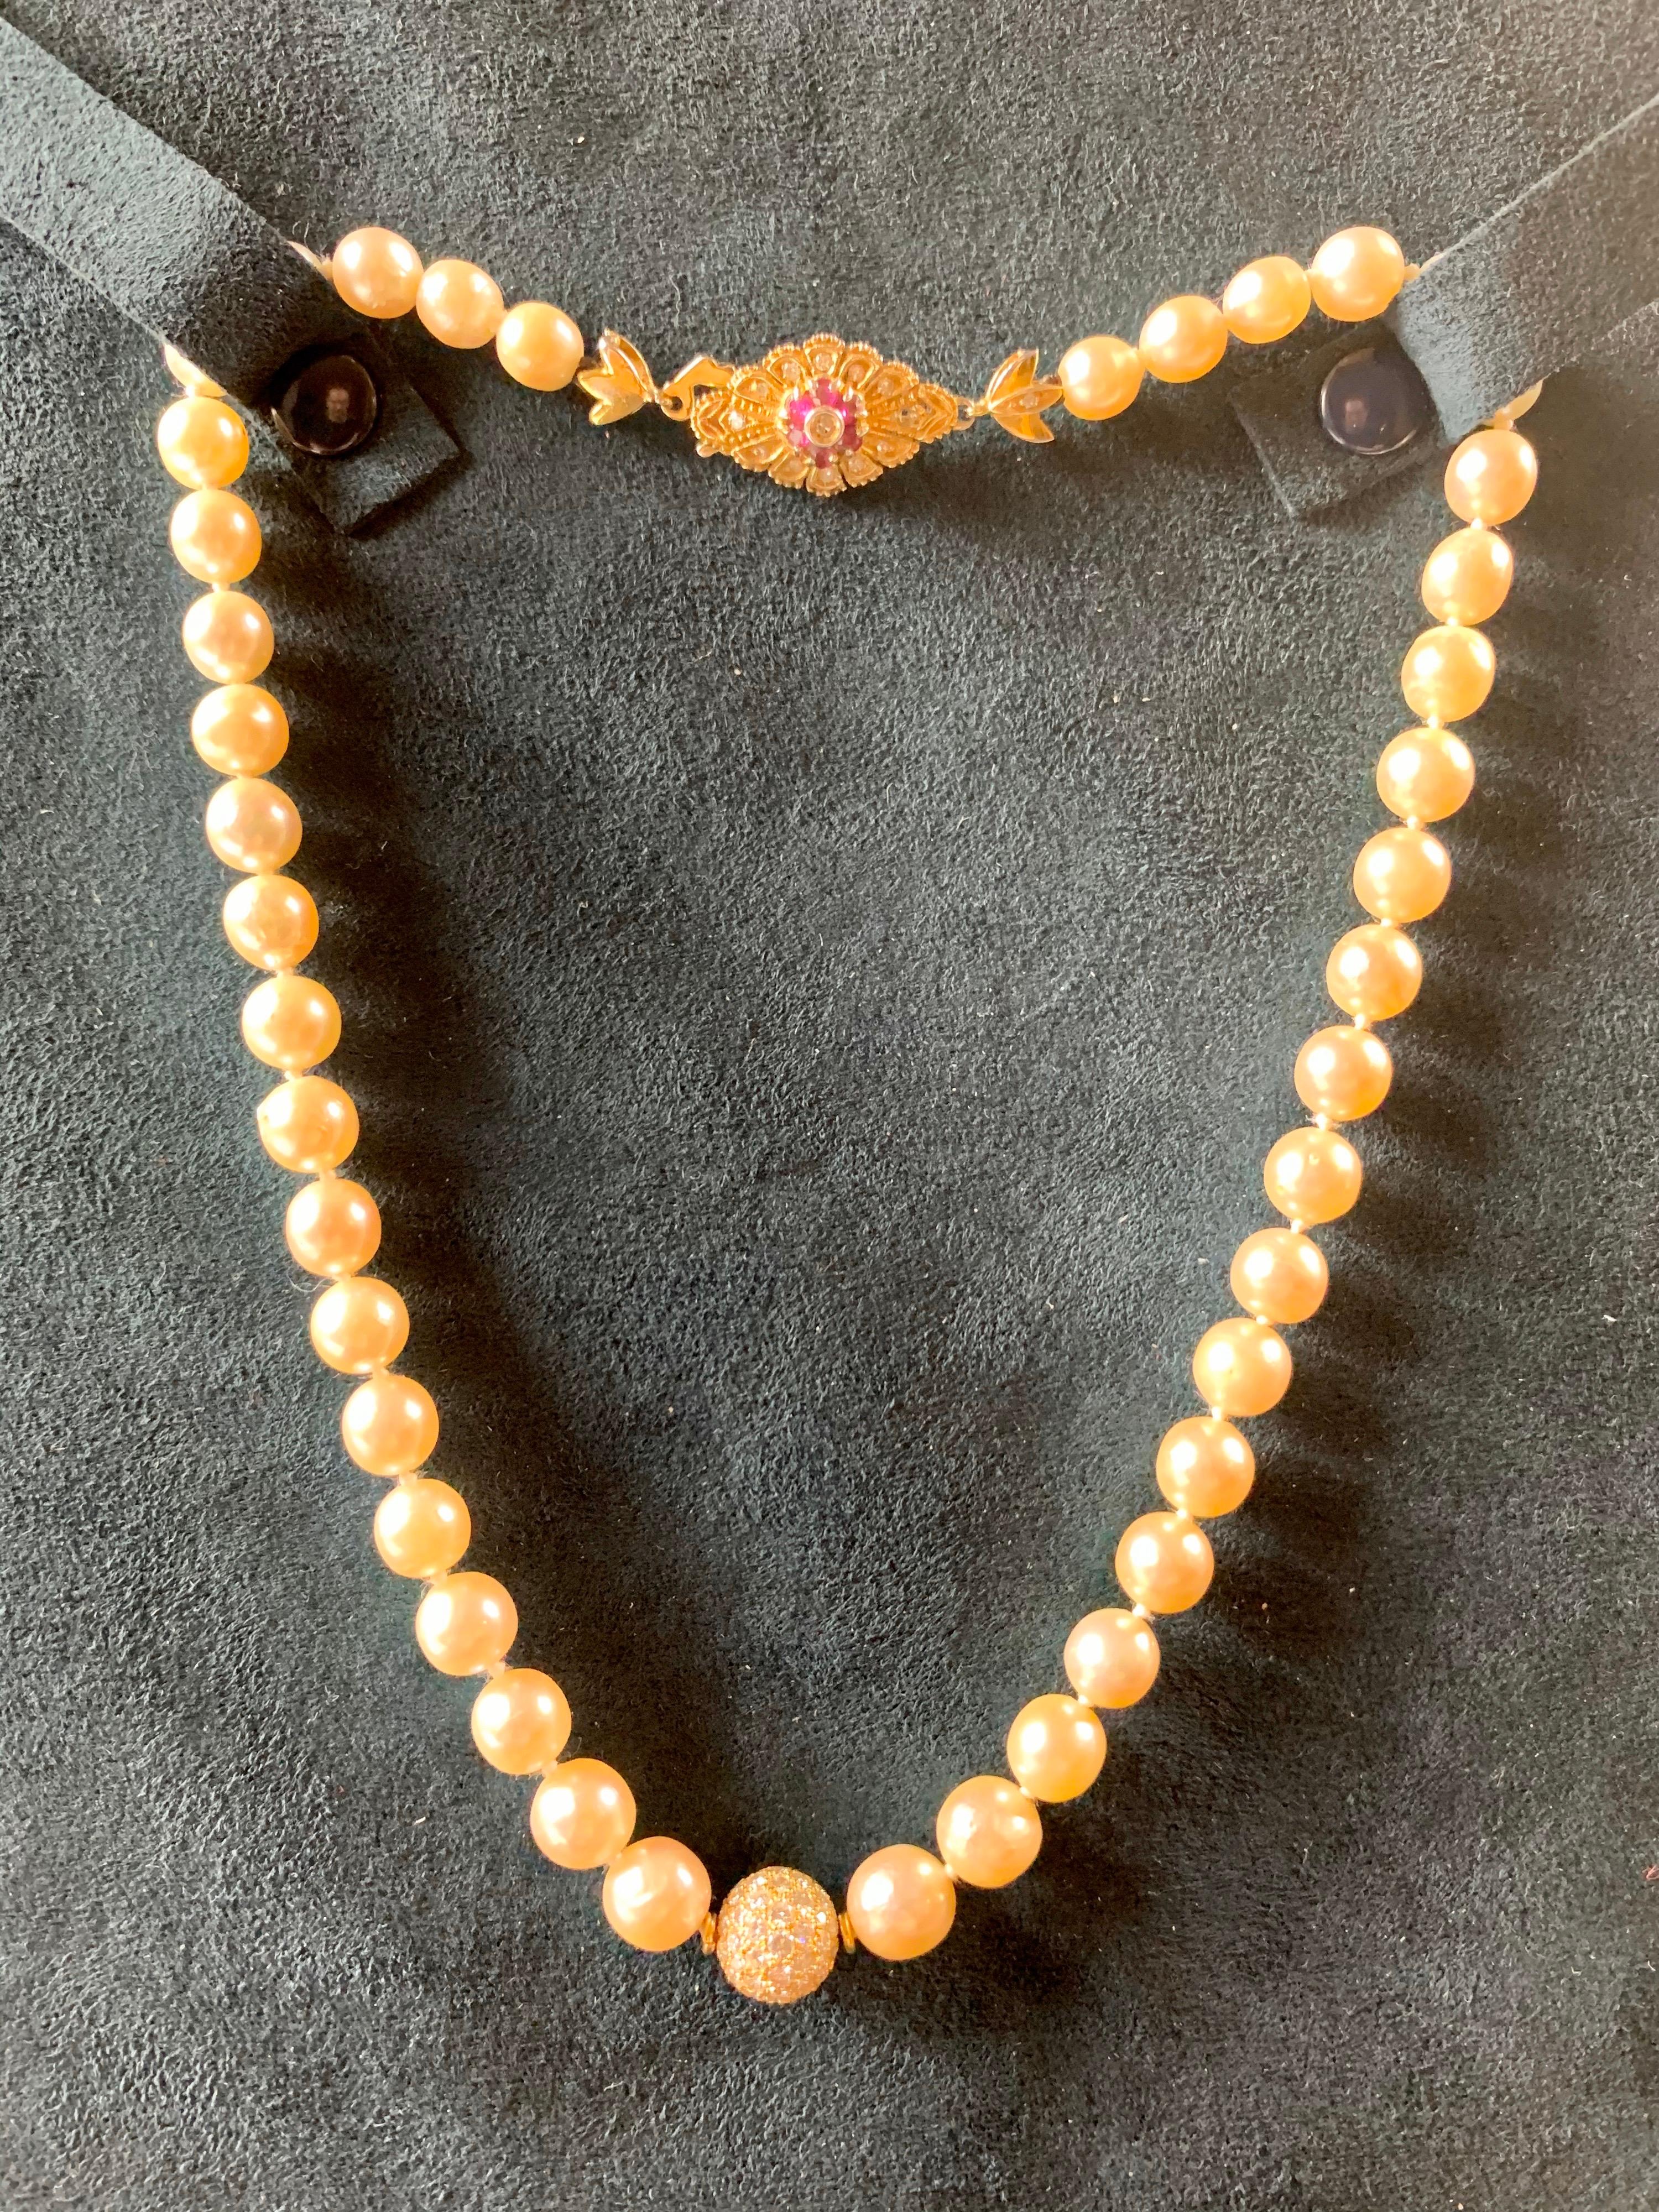 A Natural Vintage Cultured Pearl (8mm) Necklace With 1 Carat Diamond Pave Ball And 18 Carat Gold With Diamond And Ruby Clasp